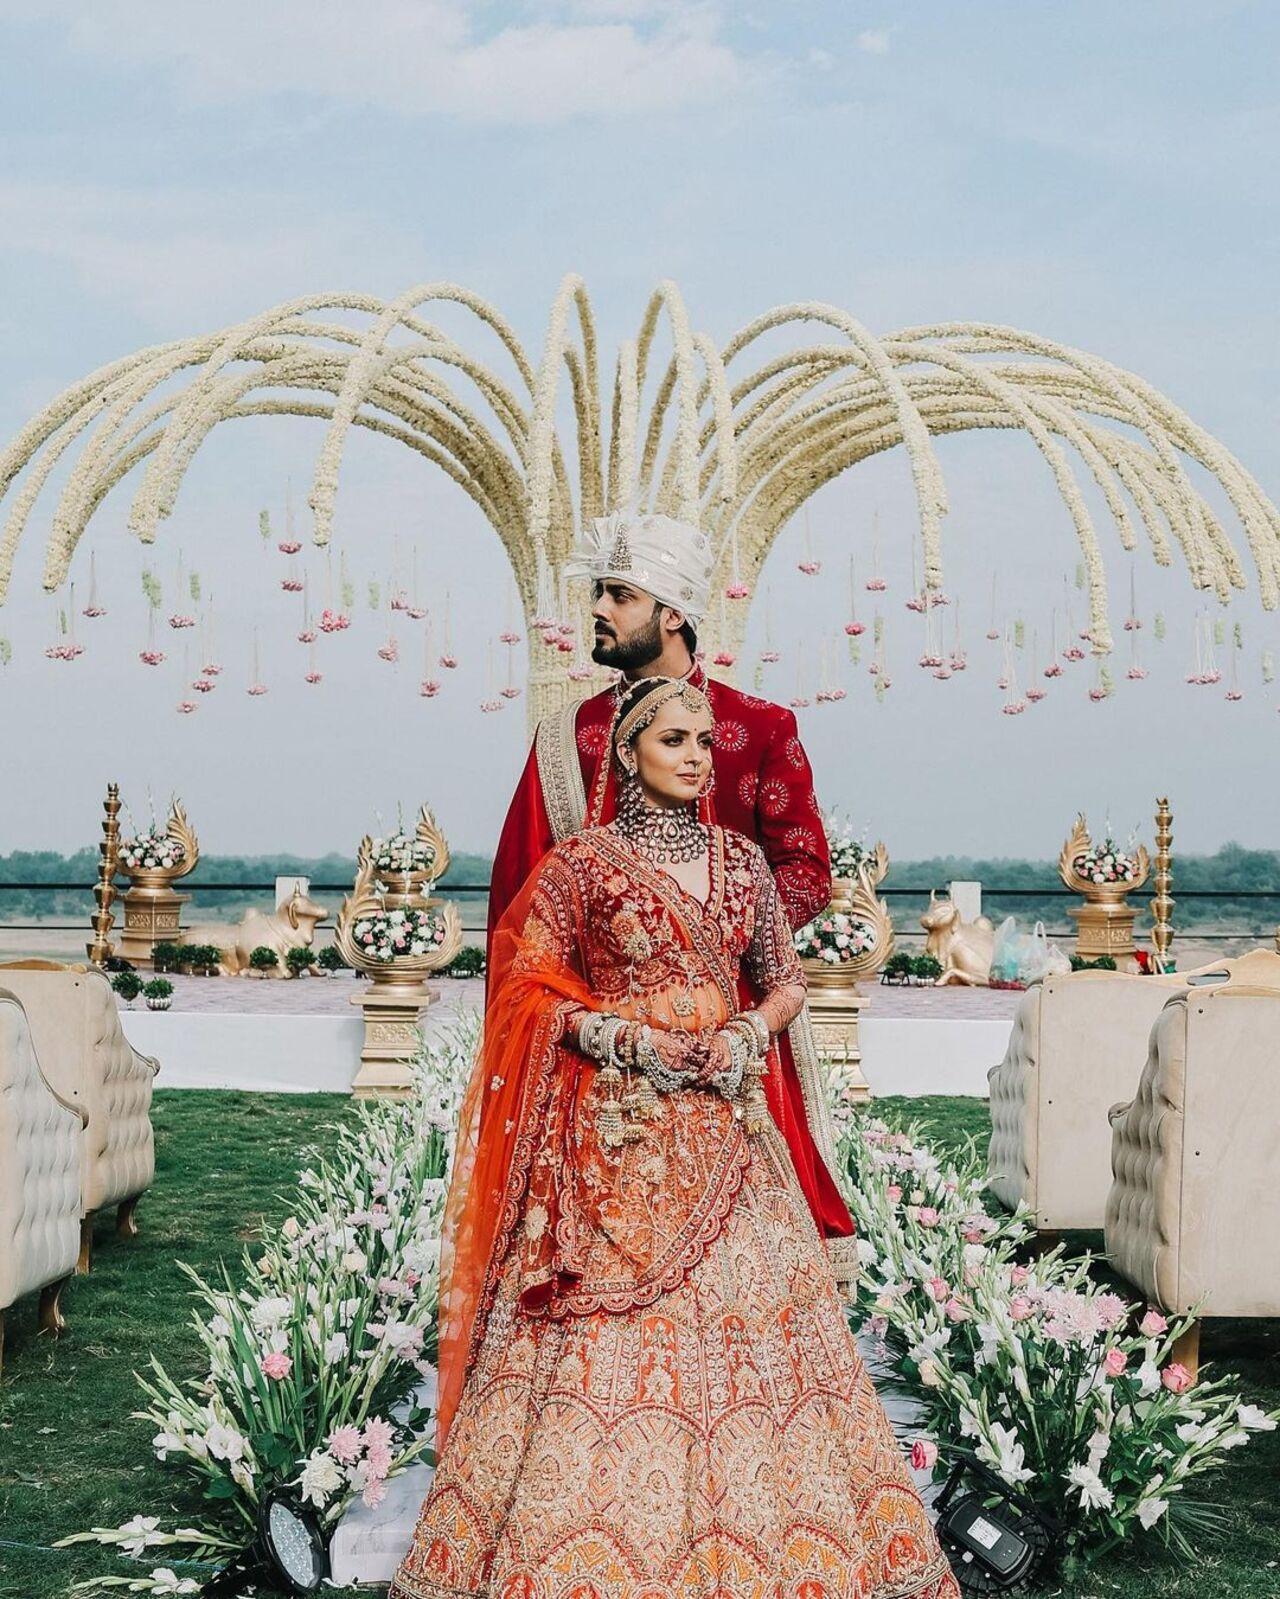 Akshay Mhatre was dressed in a red sherwani to complement his beautiful wife. The couple looked all shades of happy in the pictures from their grand wedding